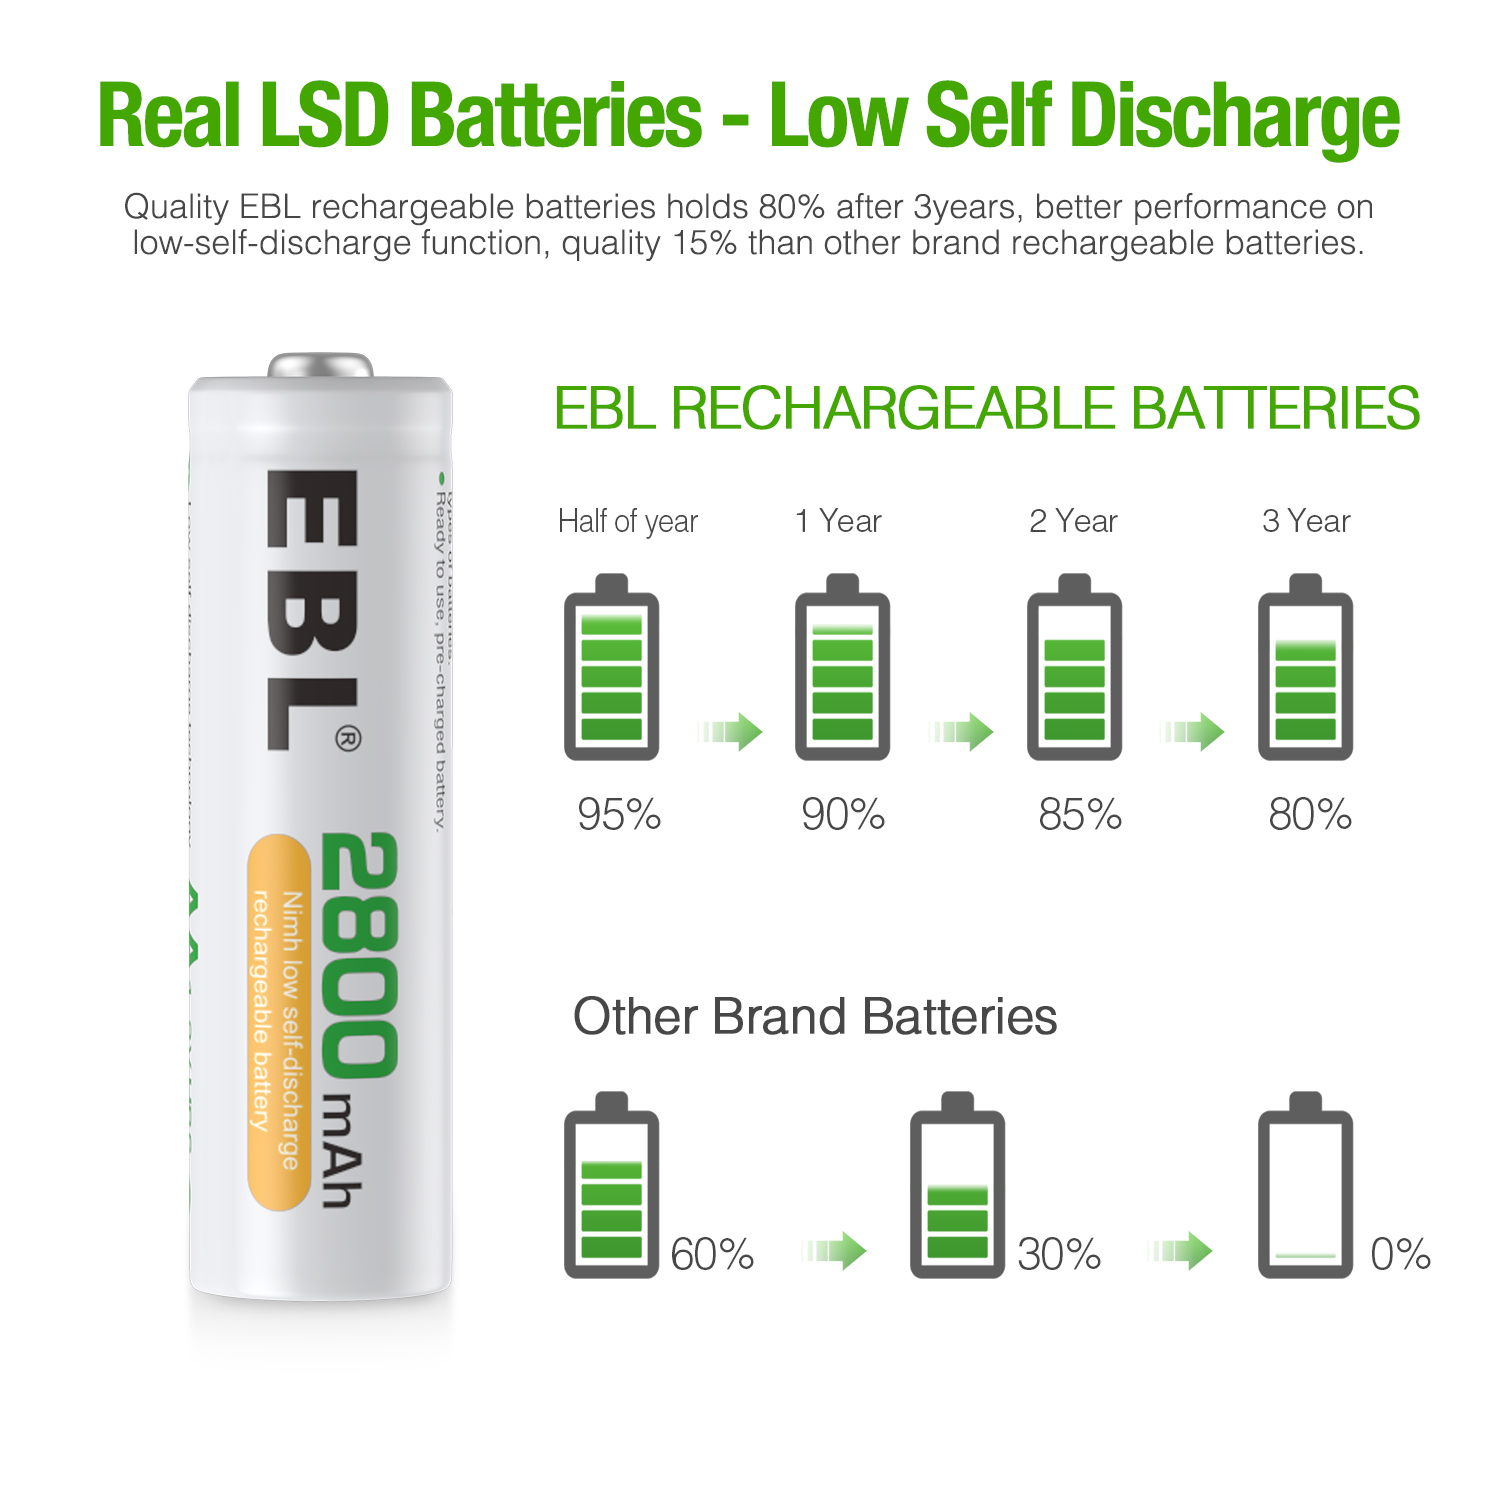 Real LSD Batteries - Low Self Discharge